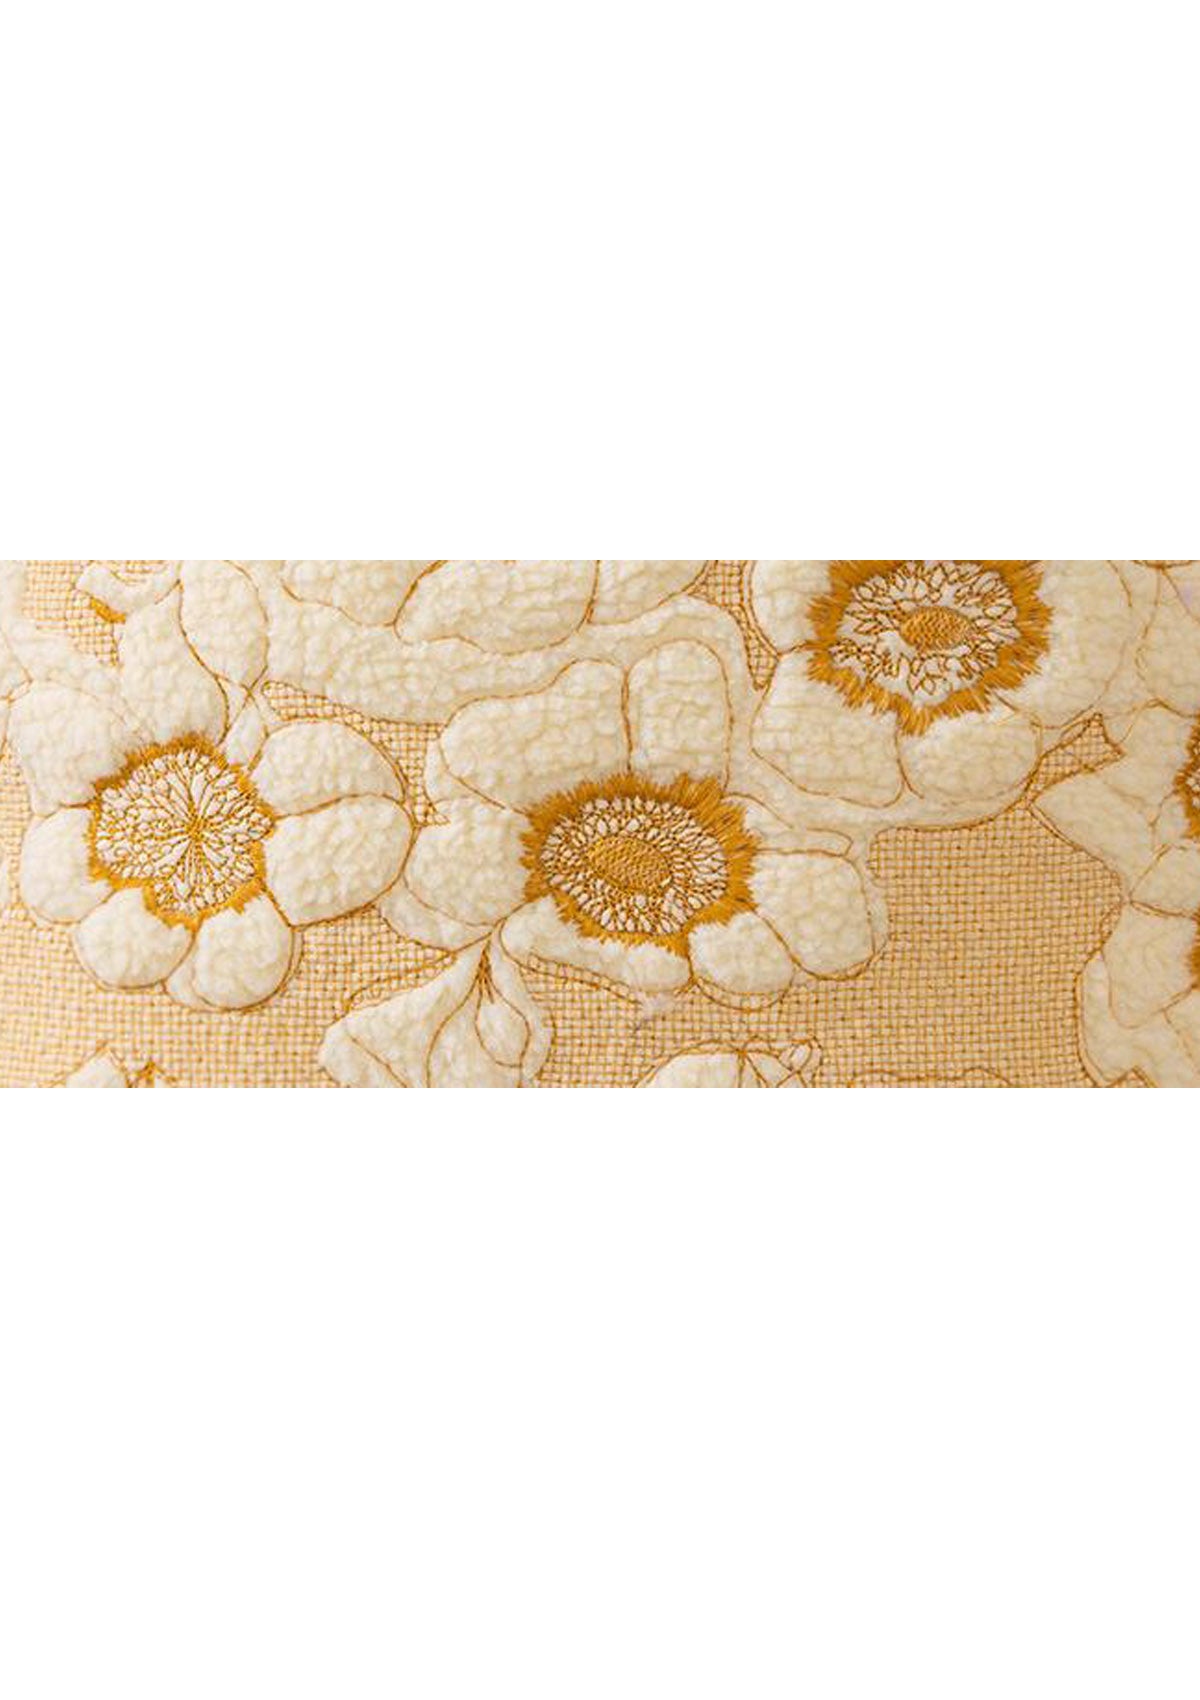 Cushion cover adorned with delightful daisy motifs, adding a touch of nature-inspired charm to your home decor